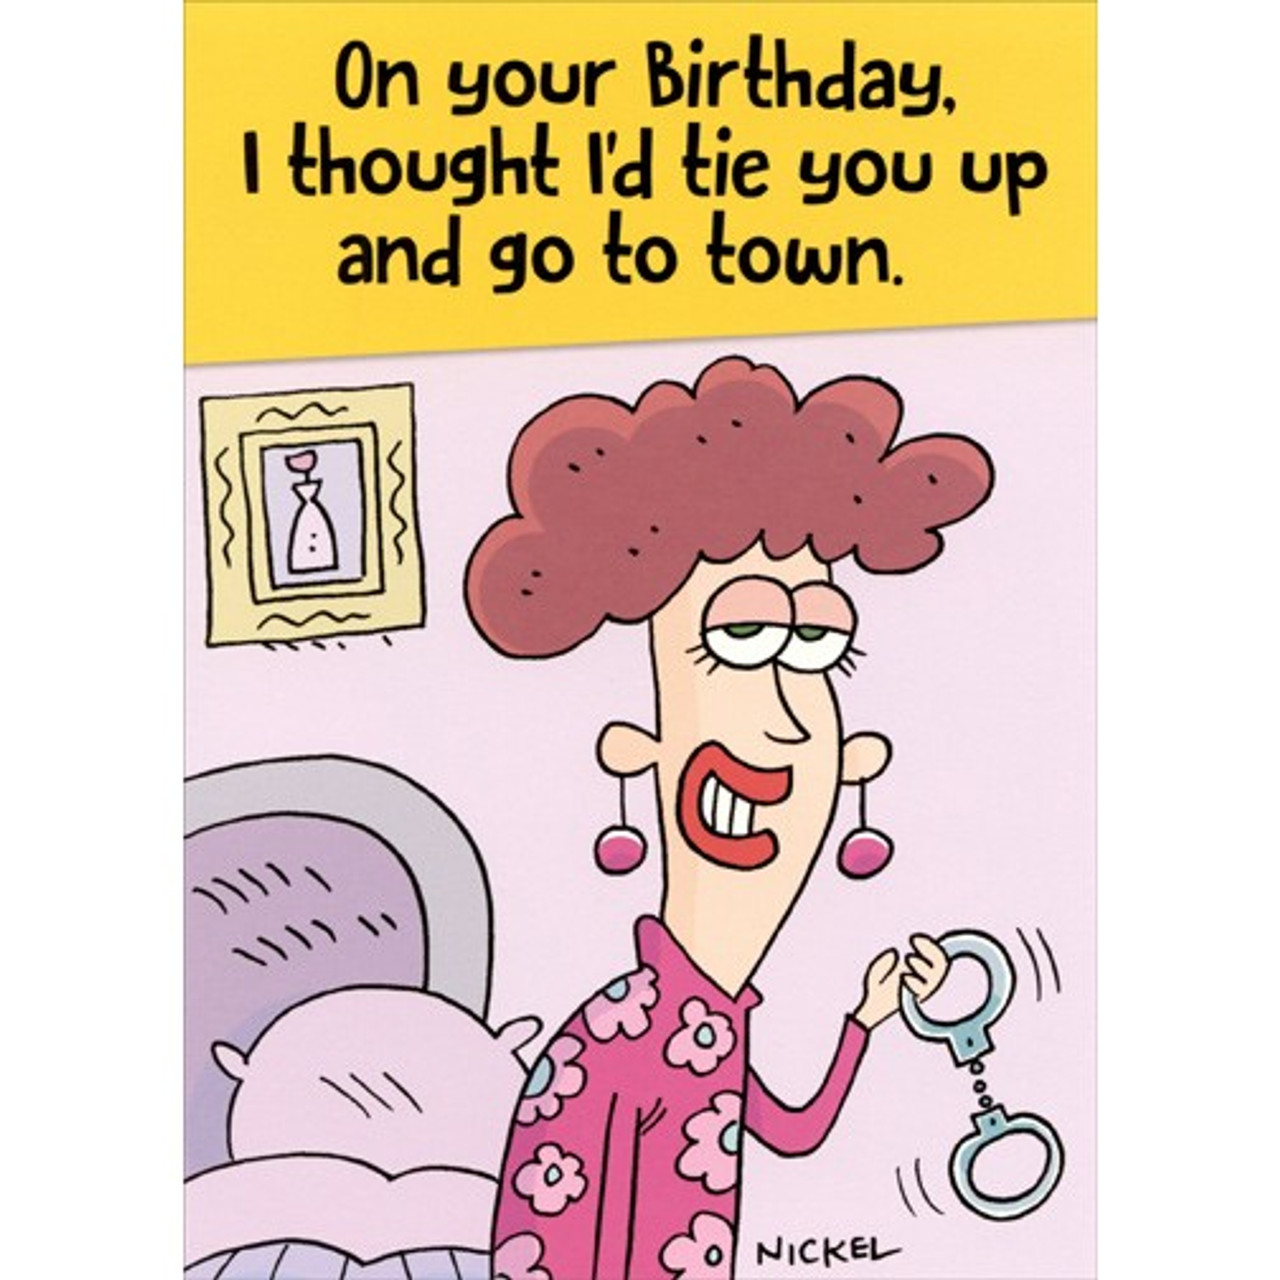 Woman with Handcuffs Funny Birthday Card | PaperCards.com